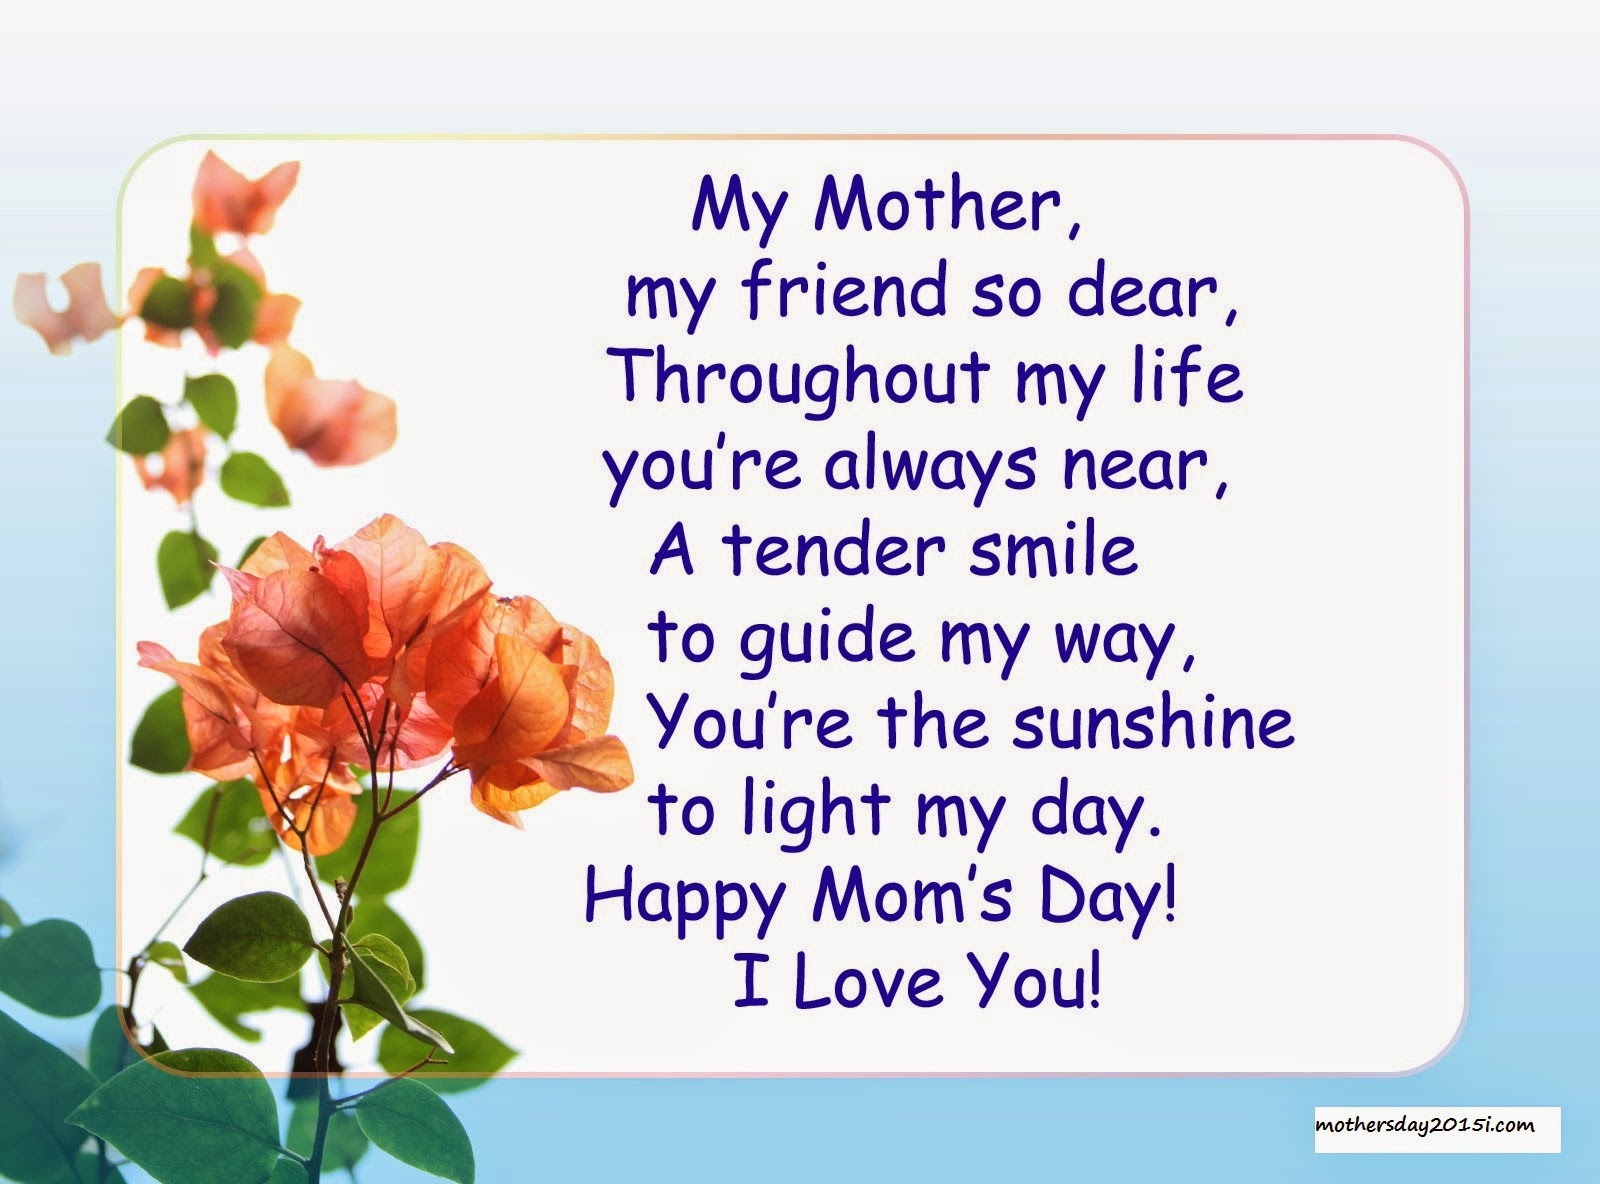 Poems On Mother | Happy Mothers Day 2015